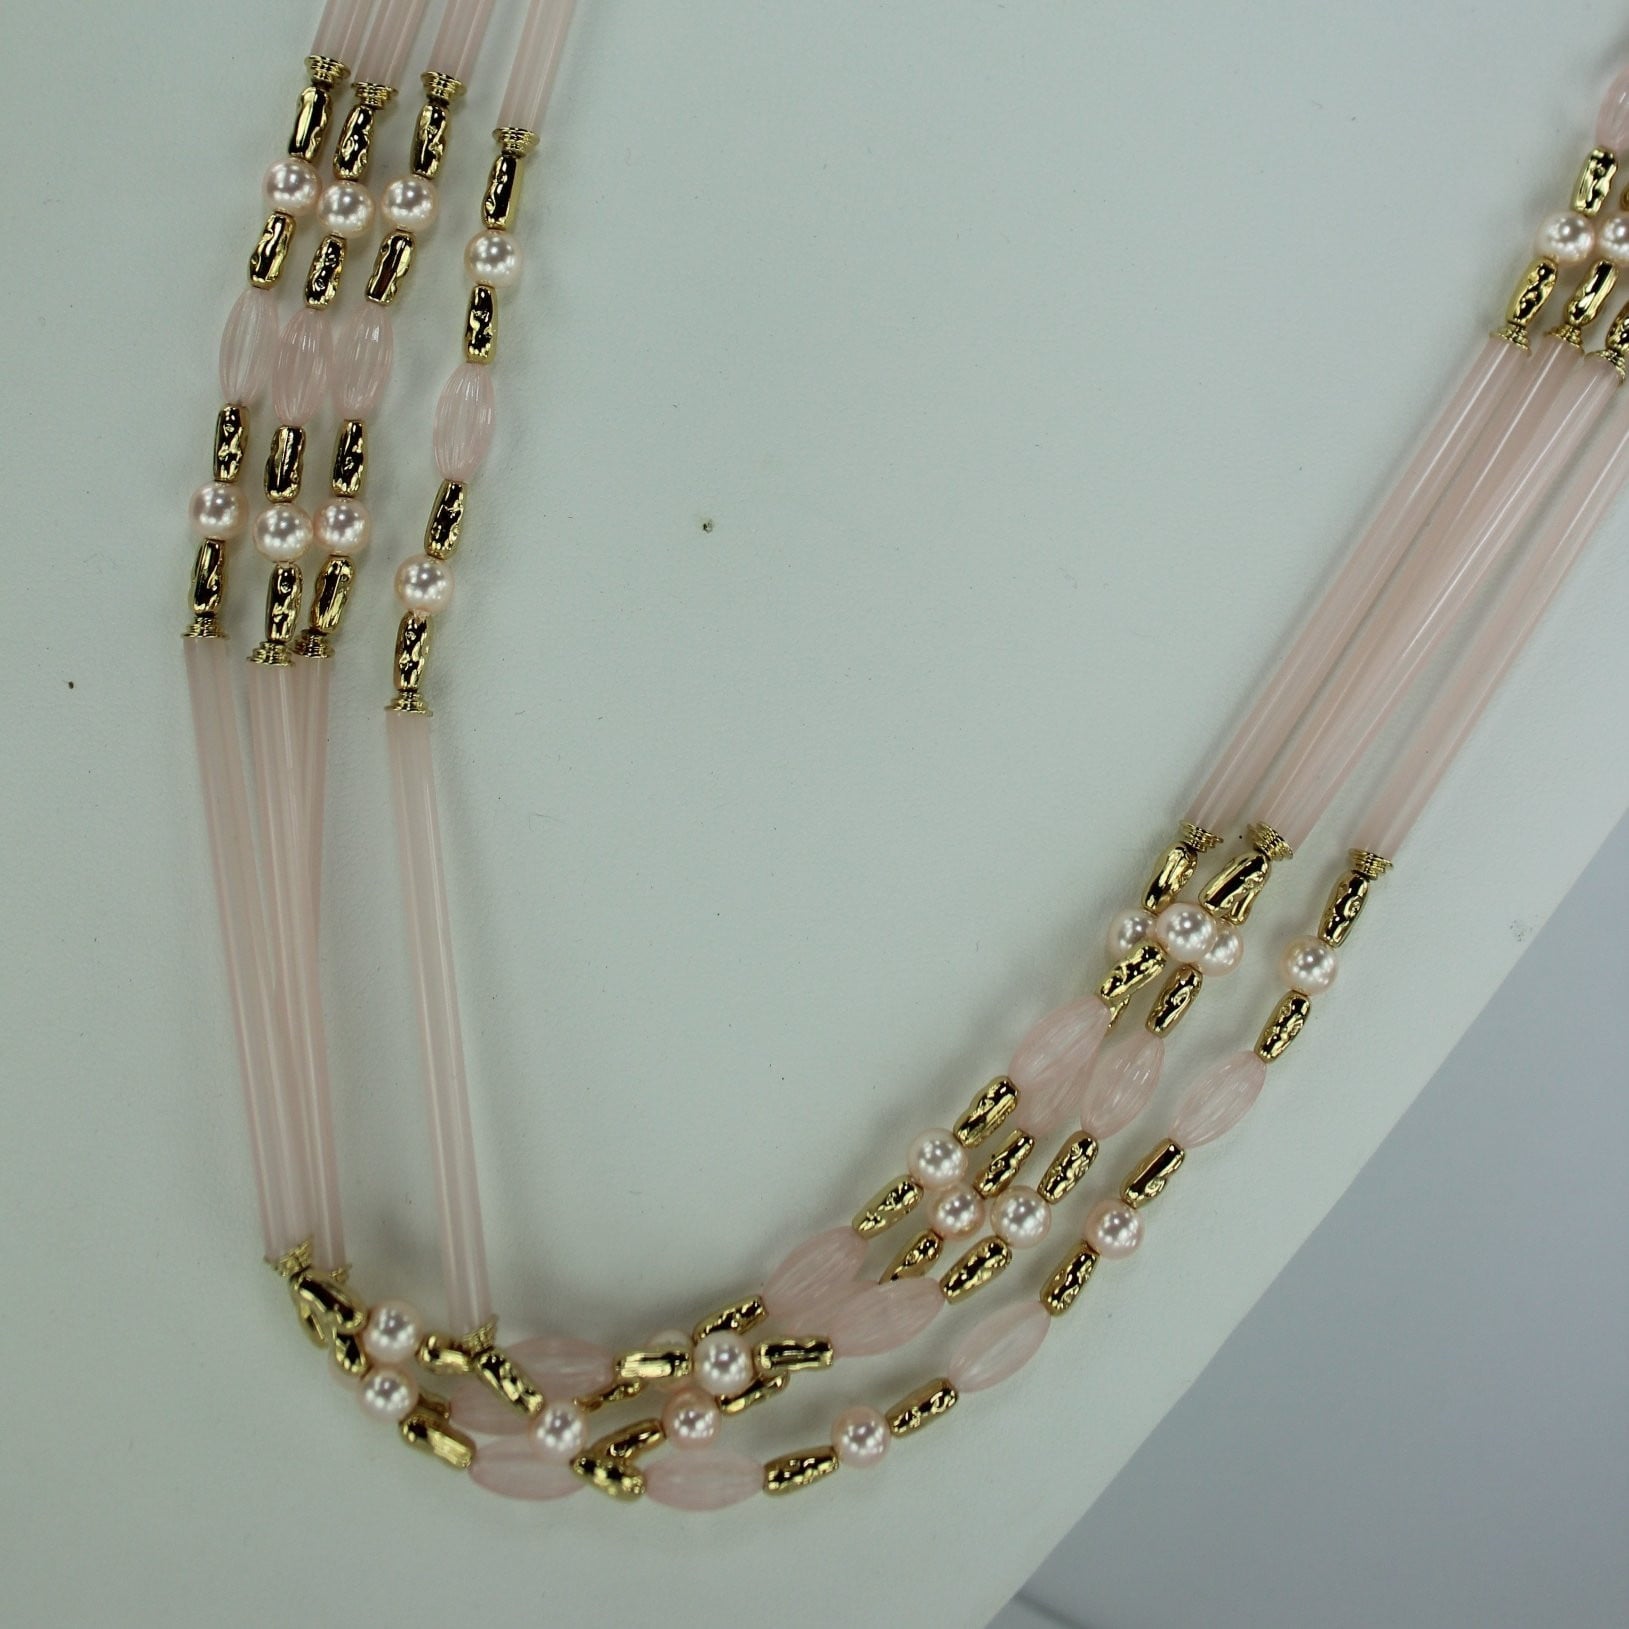 Marvella Pearl Necklace Pink Beads New with Tag 4 strand 34" elegant